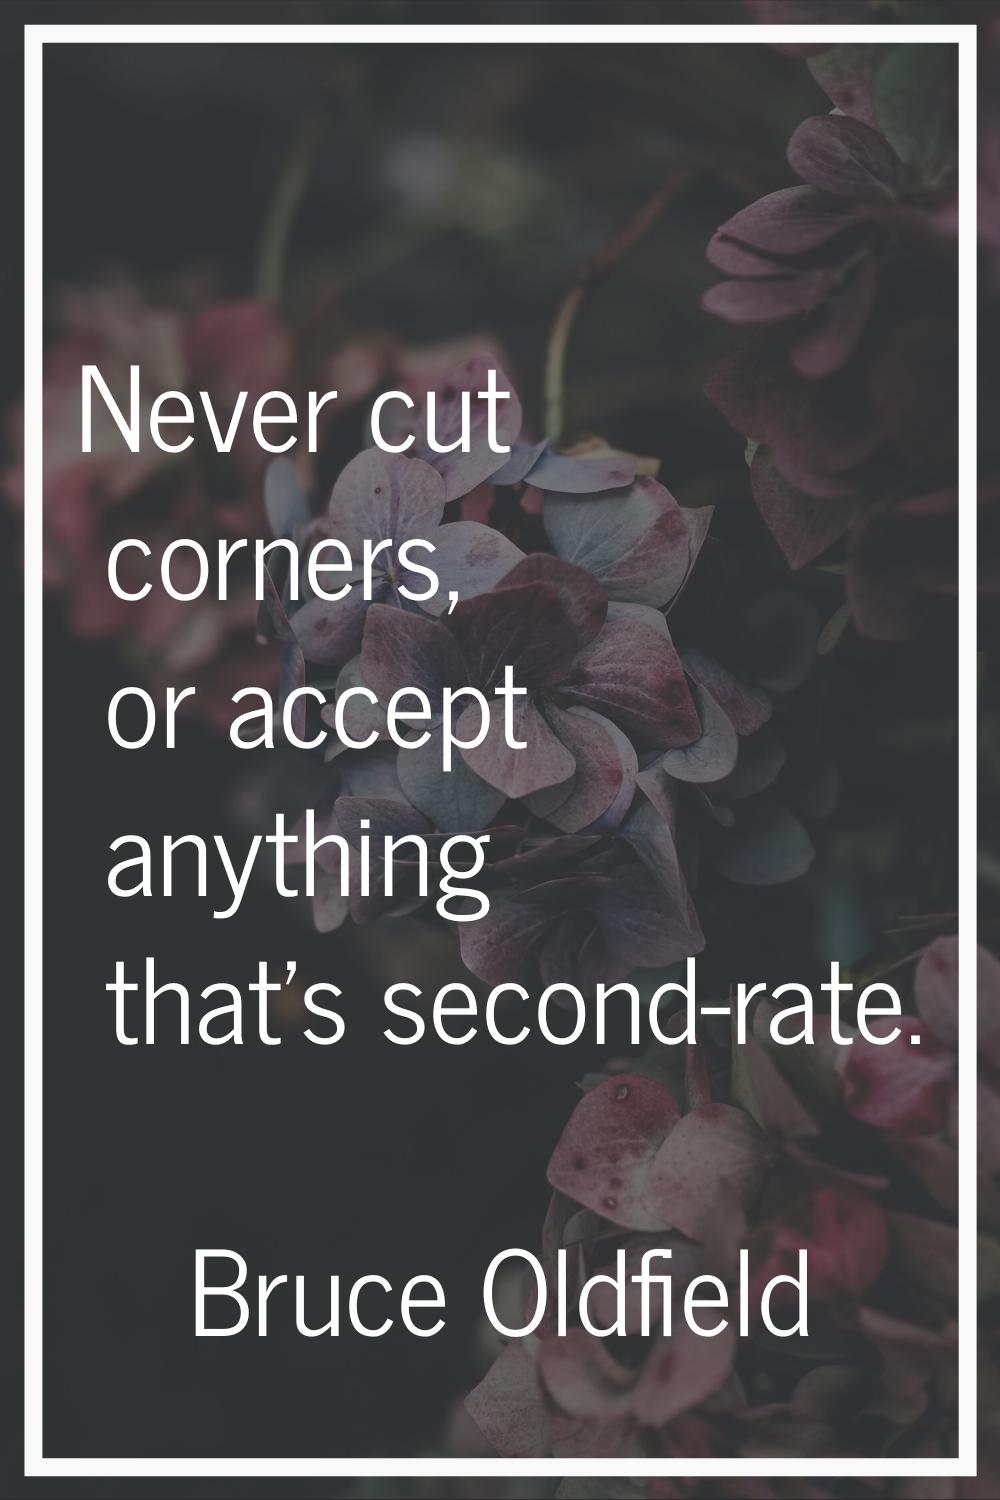 Never cut corners, or accept anything that's second-rate.